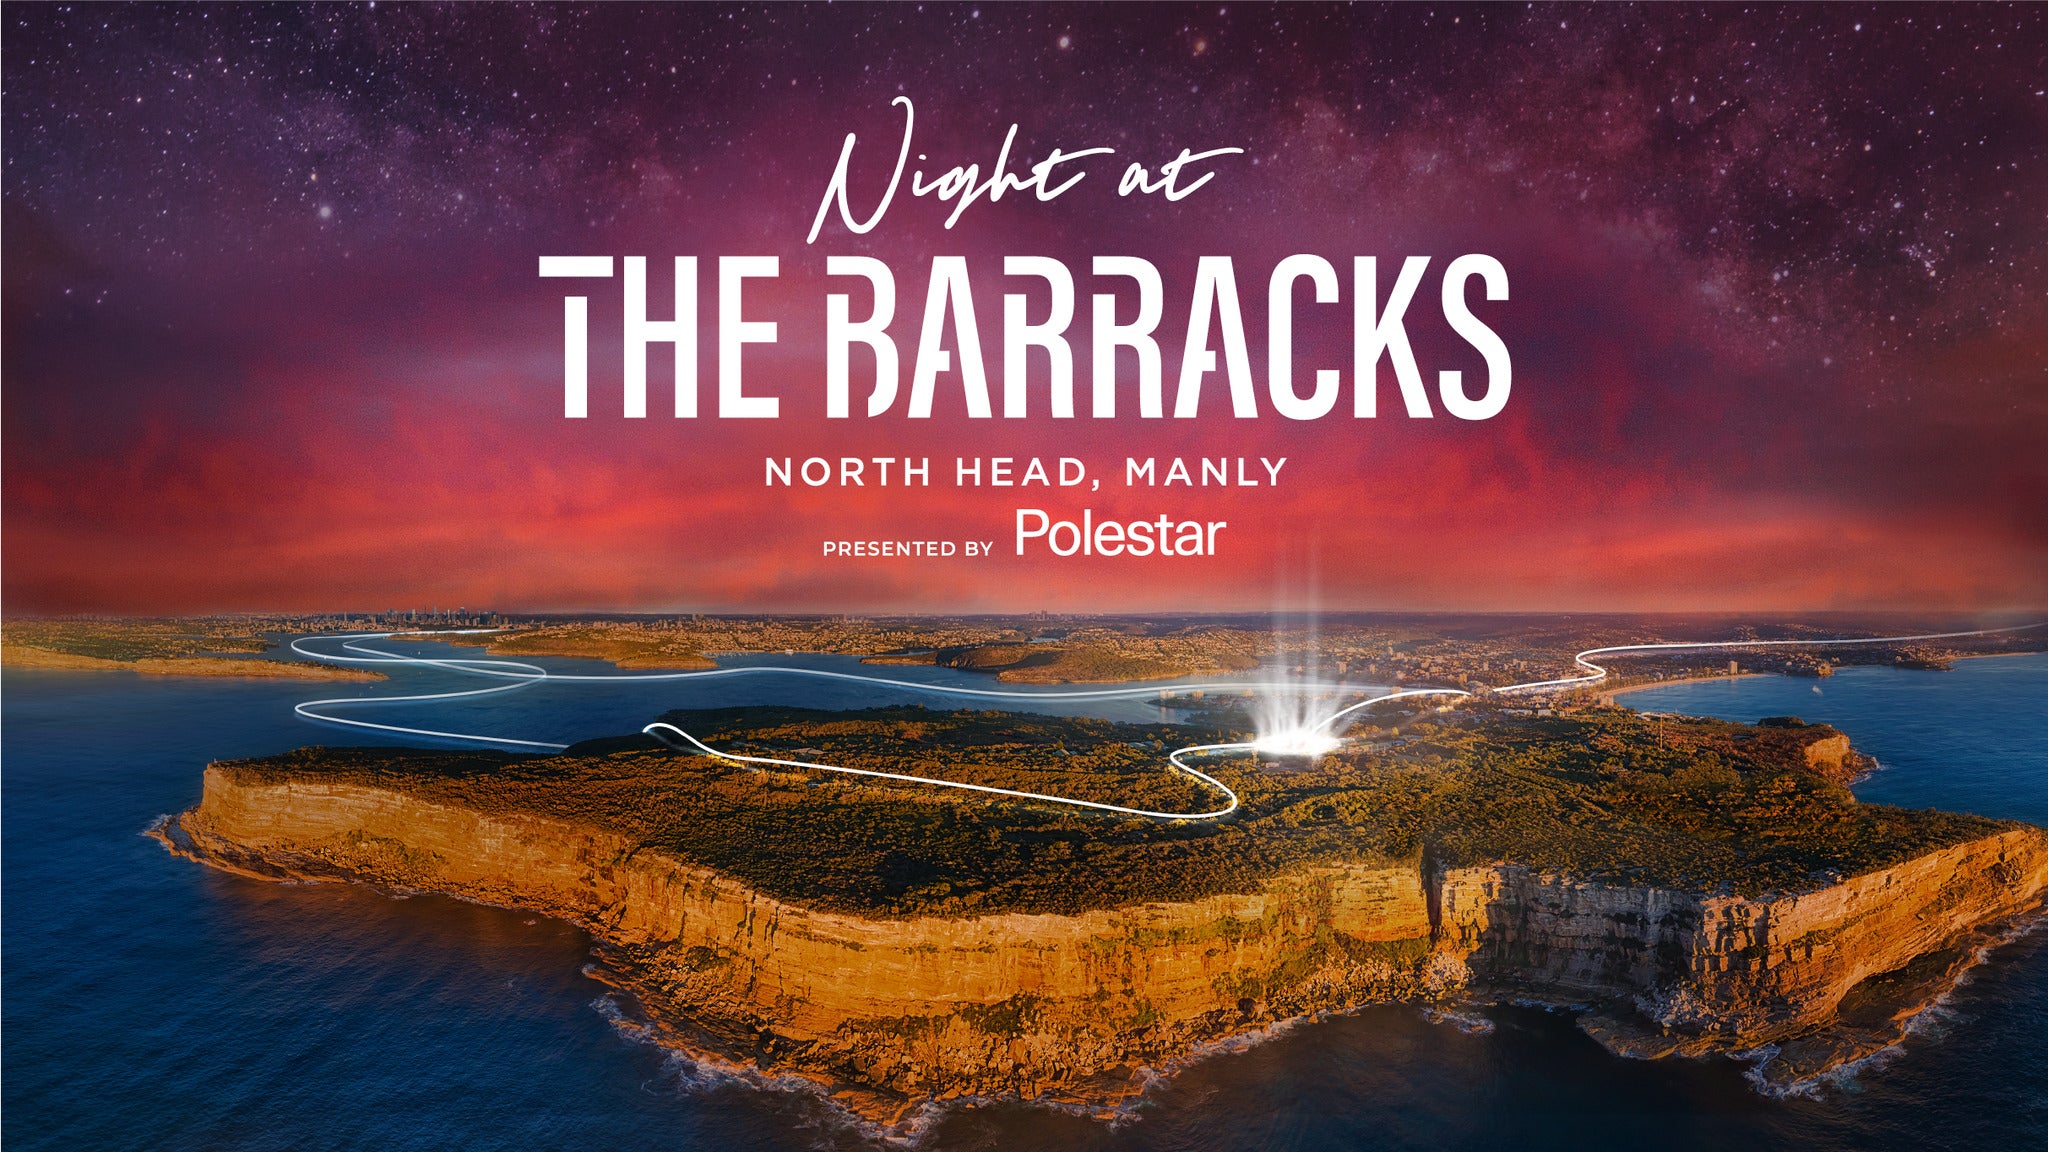 Image used with permission from Ticketmaster | Night at the Barracks - Winston Surfshirt tickets